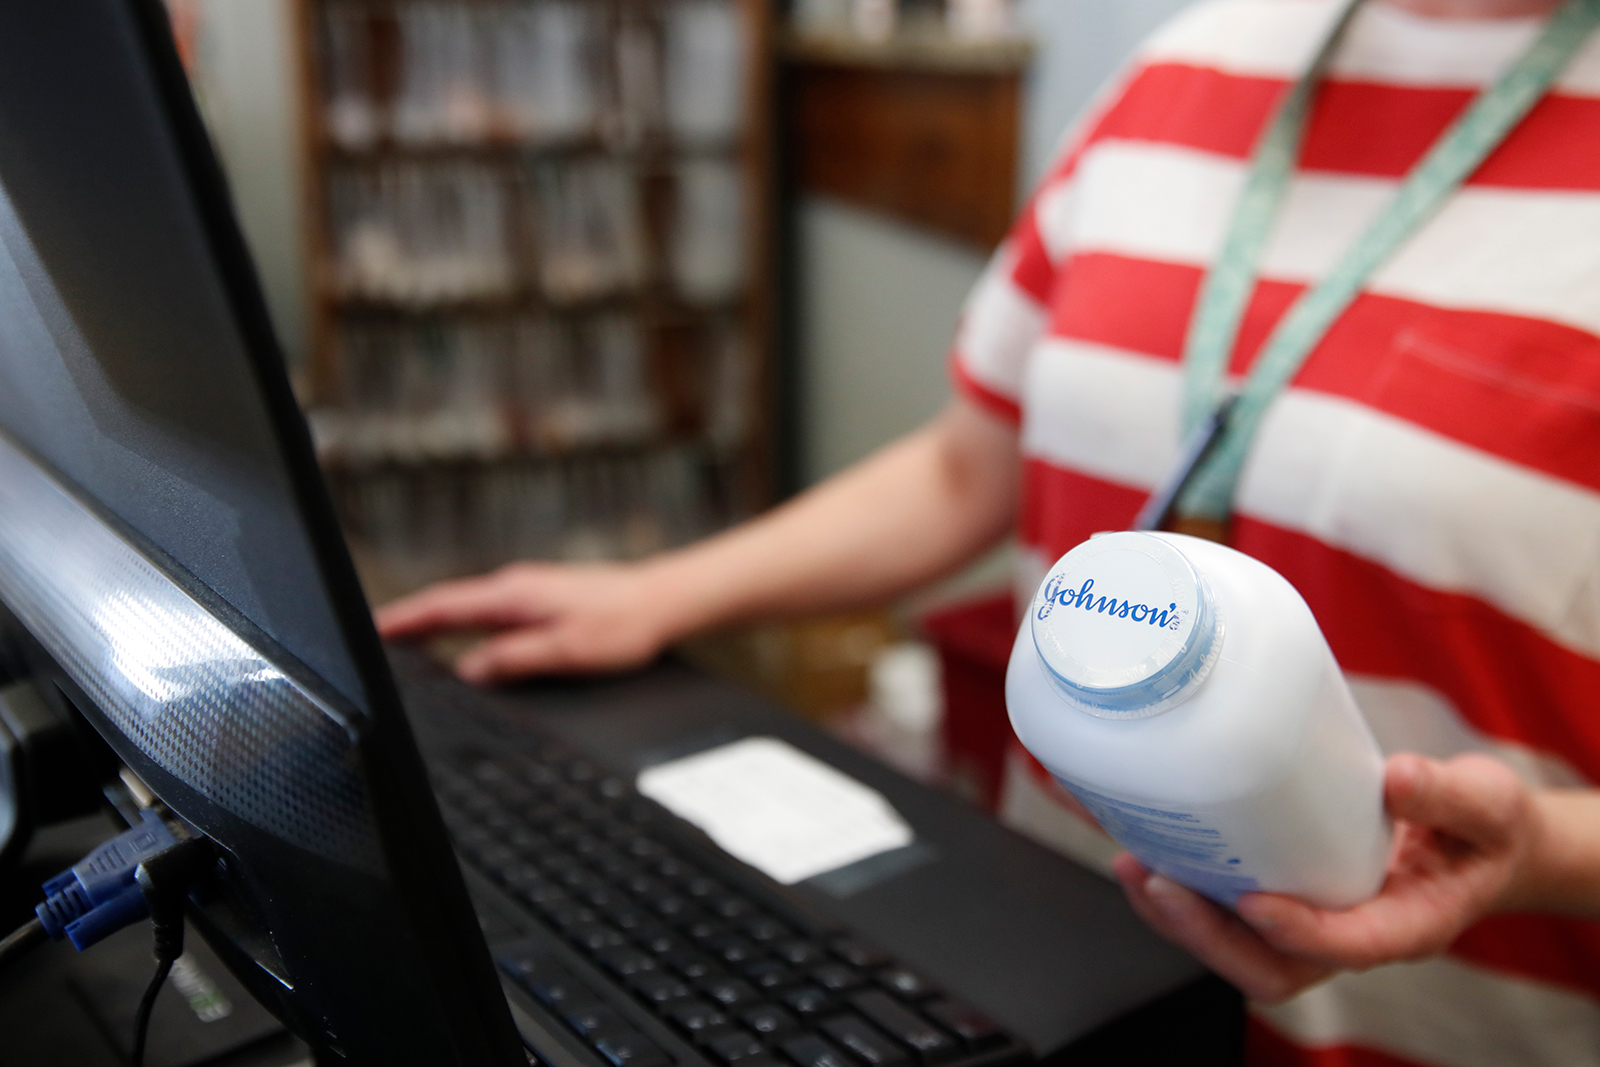 A cashier holds a bottle of Johnson & Johnson's brand baby powder at a pharmacy in Salt Lake Ci...